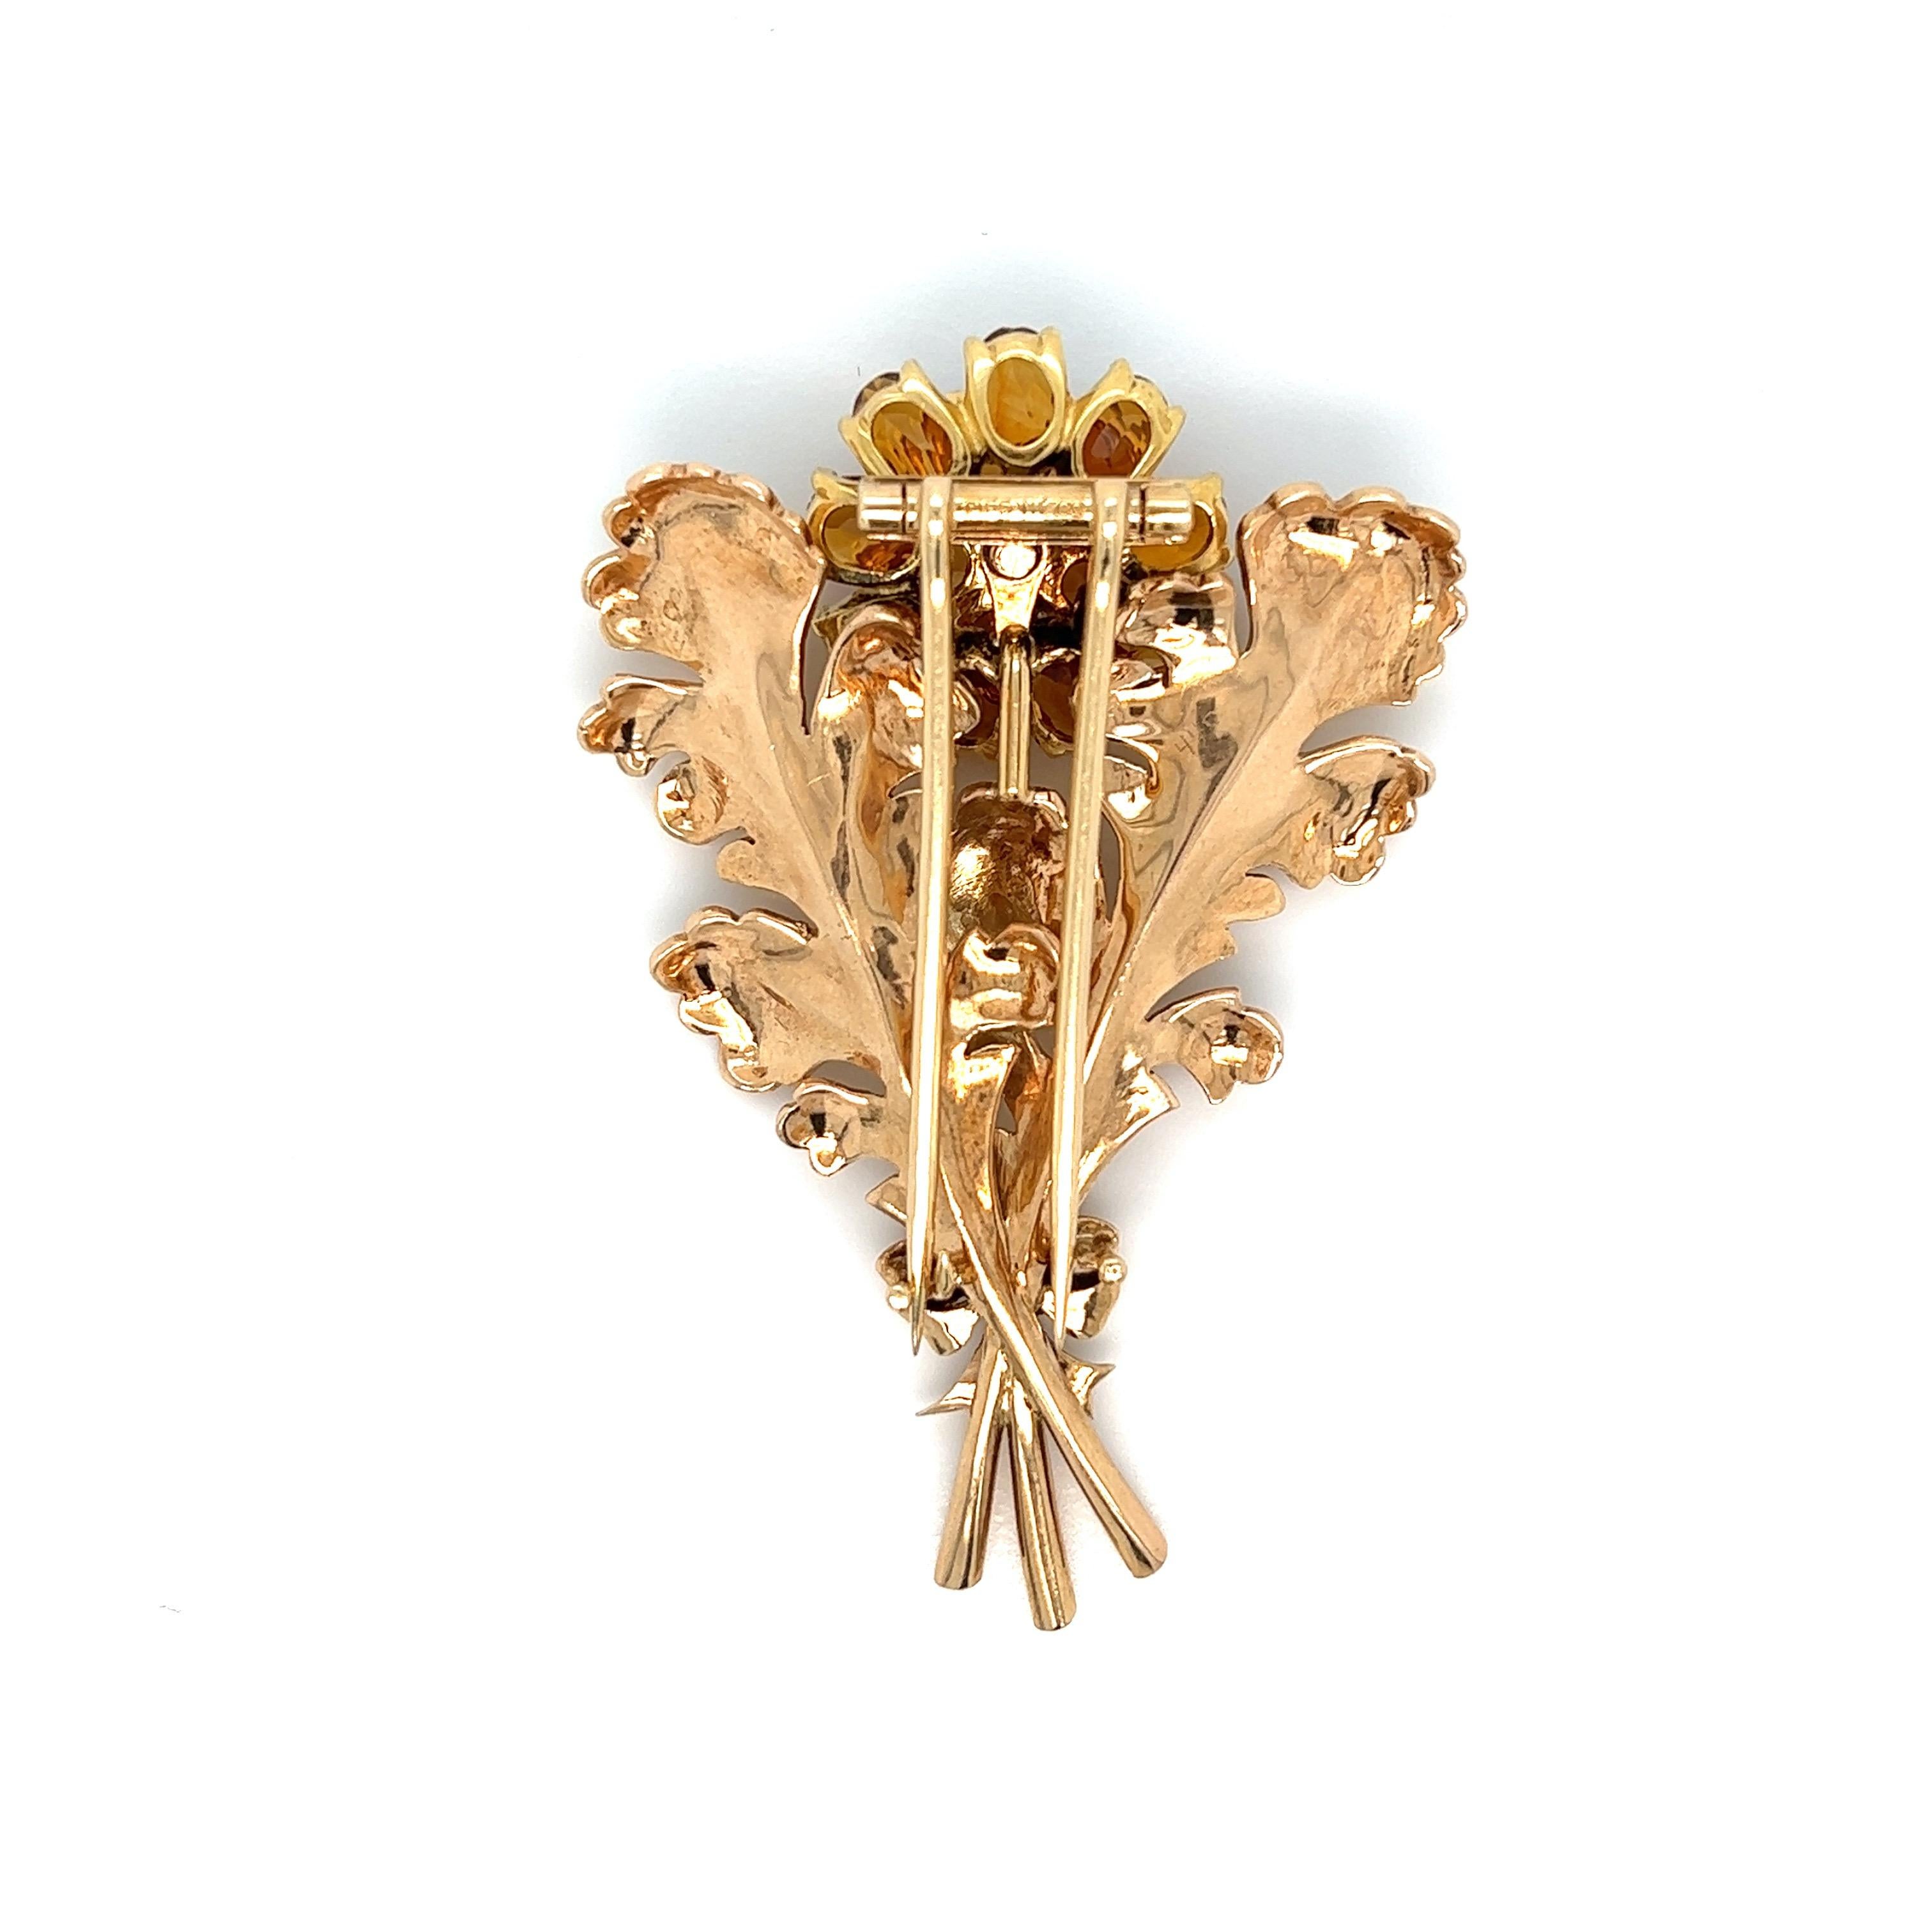 Tiffany & Co. yellow gold brooch with flower and leaves motifs. The flower's petals are made out of citrine and at its center is a round diamond weighing approximately 0.6 carat. Marked: Tiffany & Co. Total weight: 22.2 grams. Width: 1.75 inch.